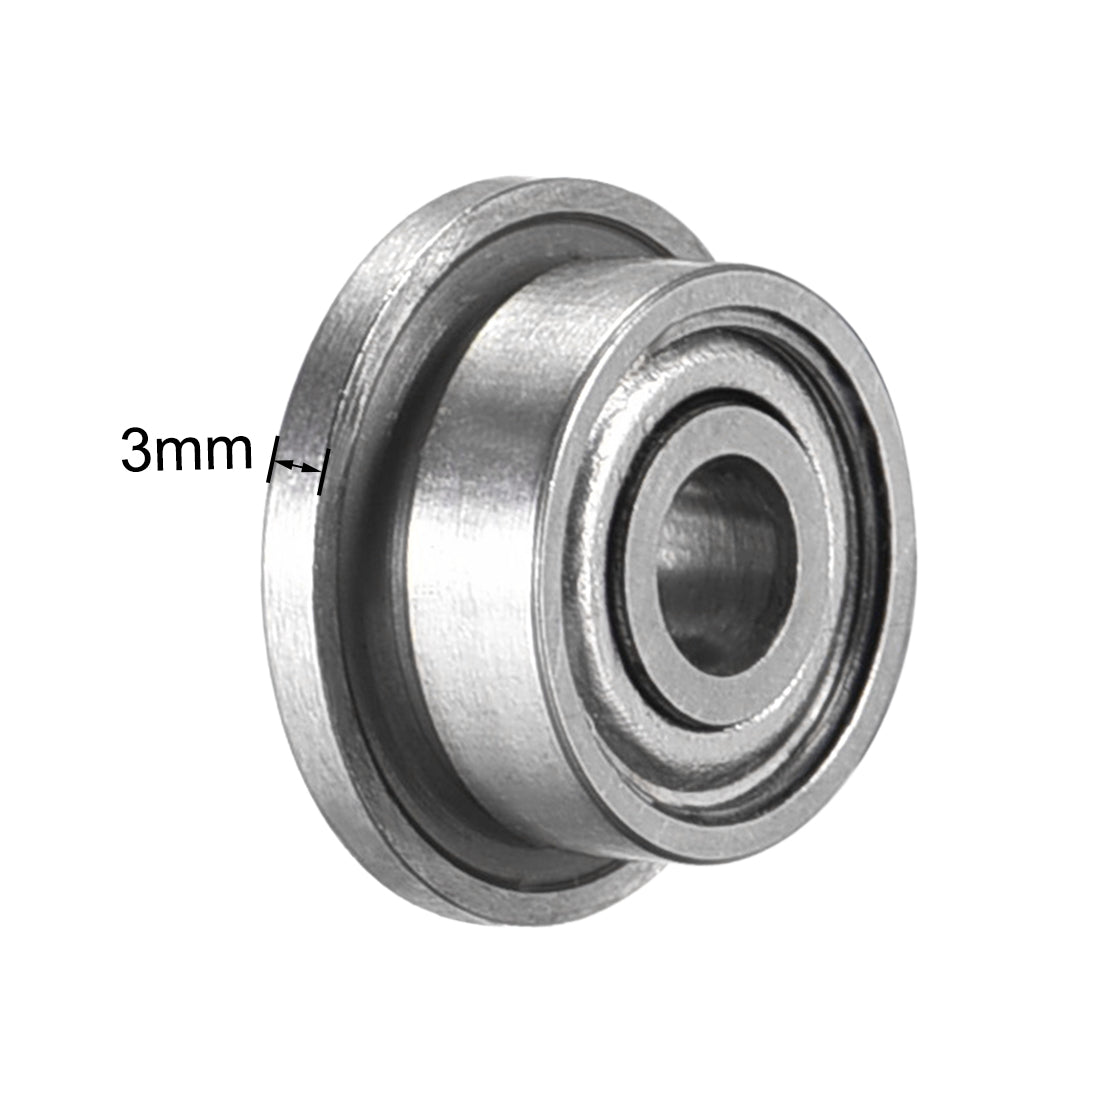 uxcell Uxcell F692ZZ Flange Ball Bearing 2x6x3mm Double Shielded Chrome Steel Bearings 5pcs